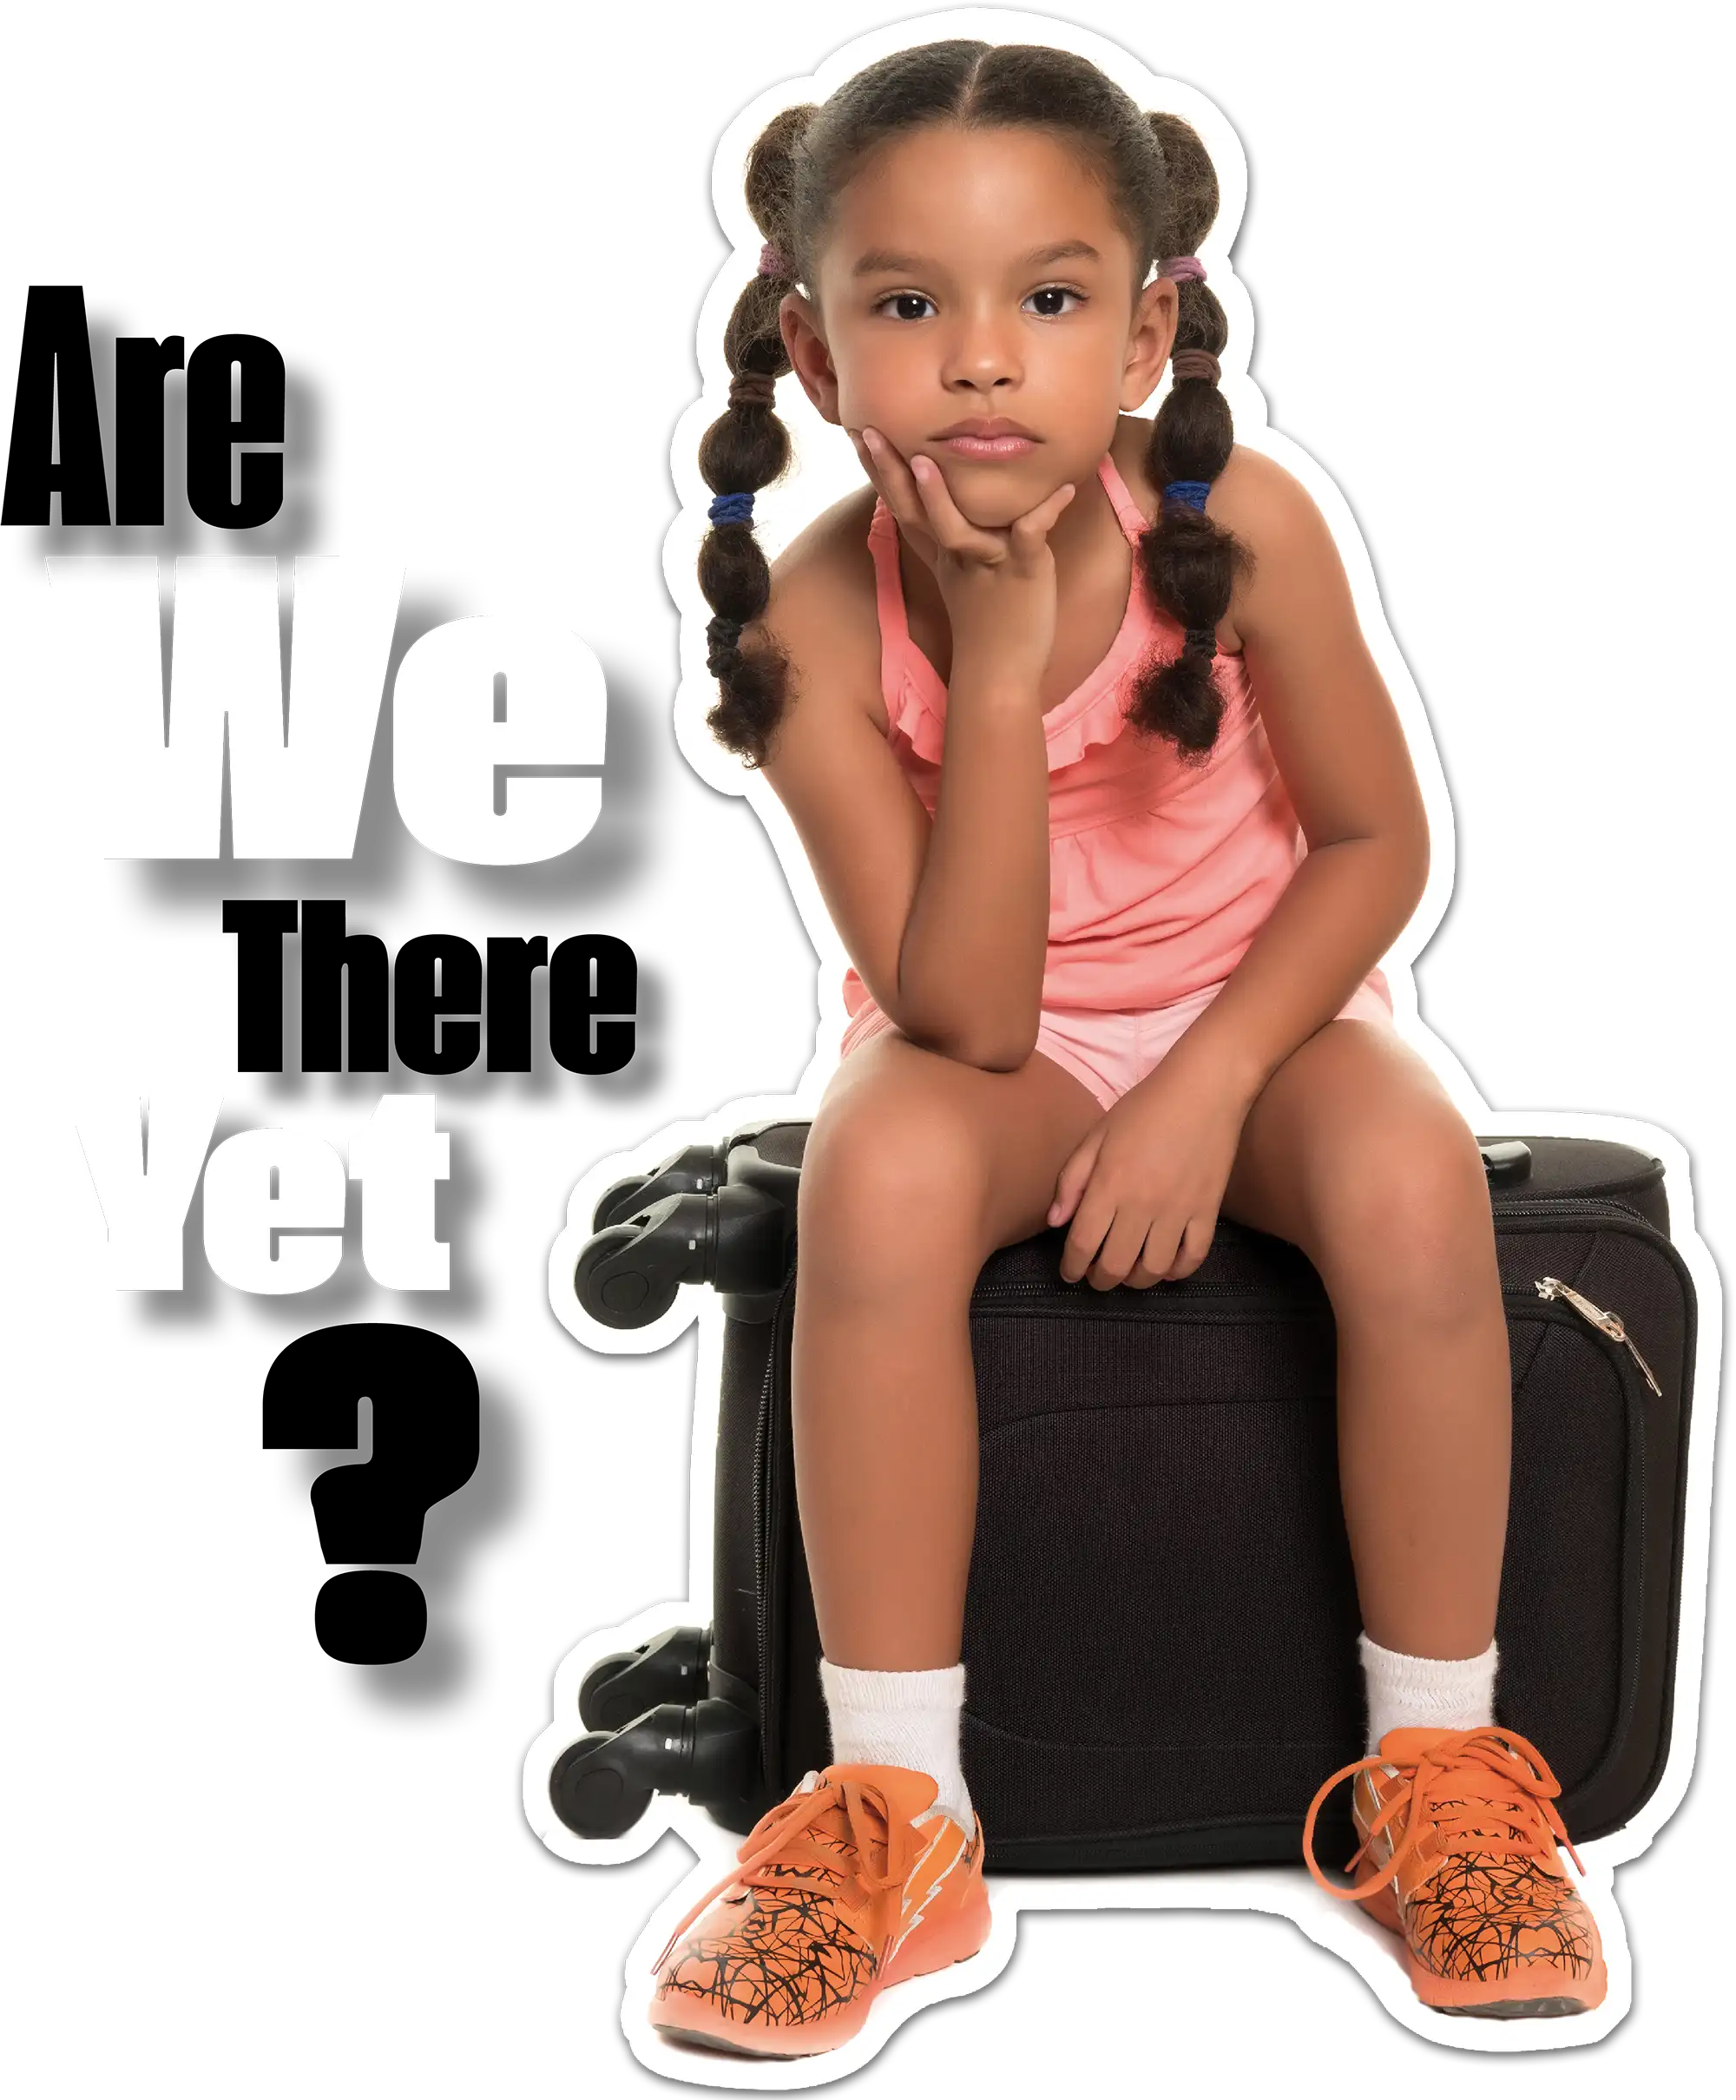 Are we there yet? typography and little girl sitting on overturned suitcase